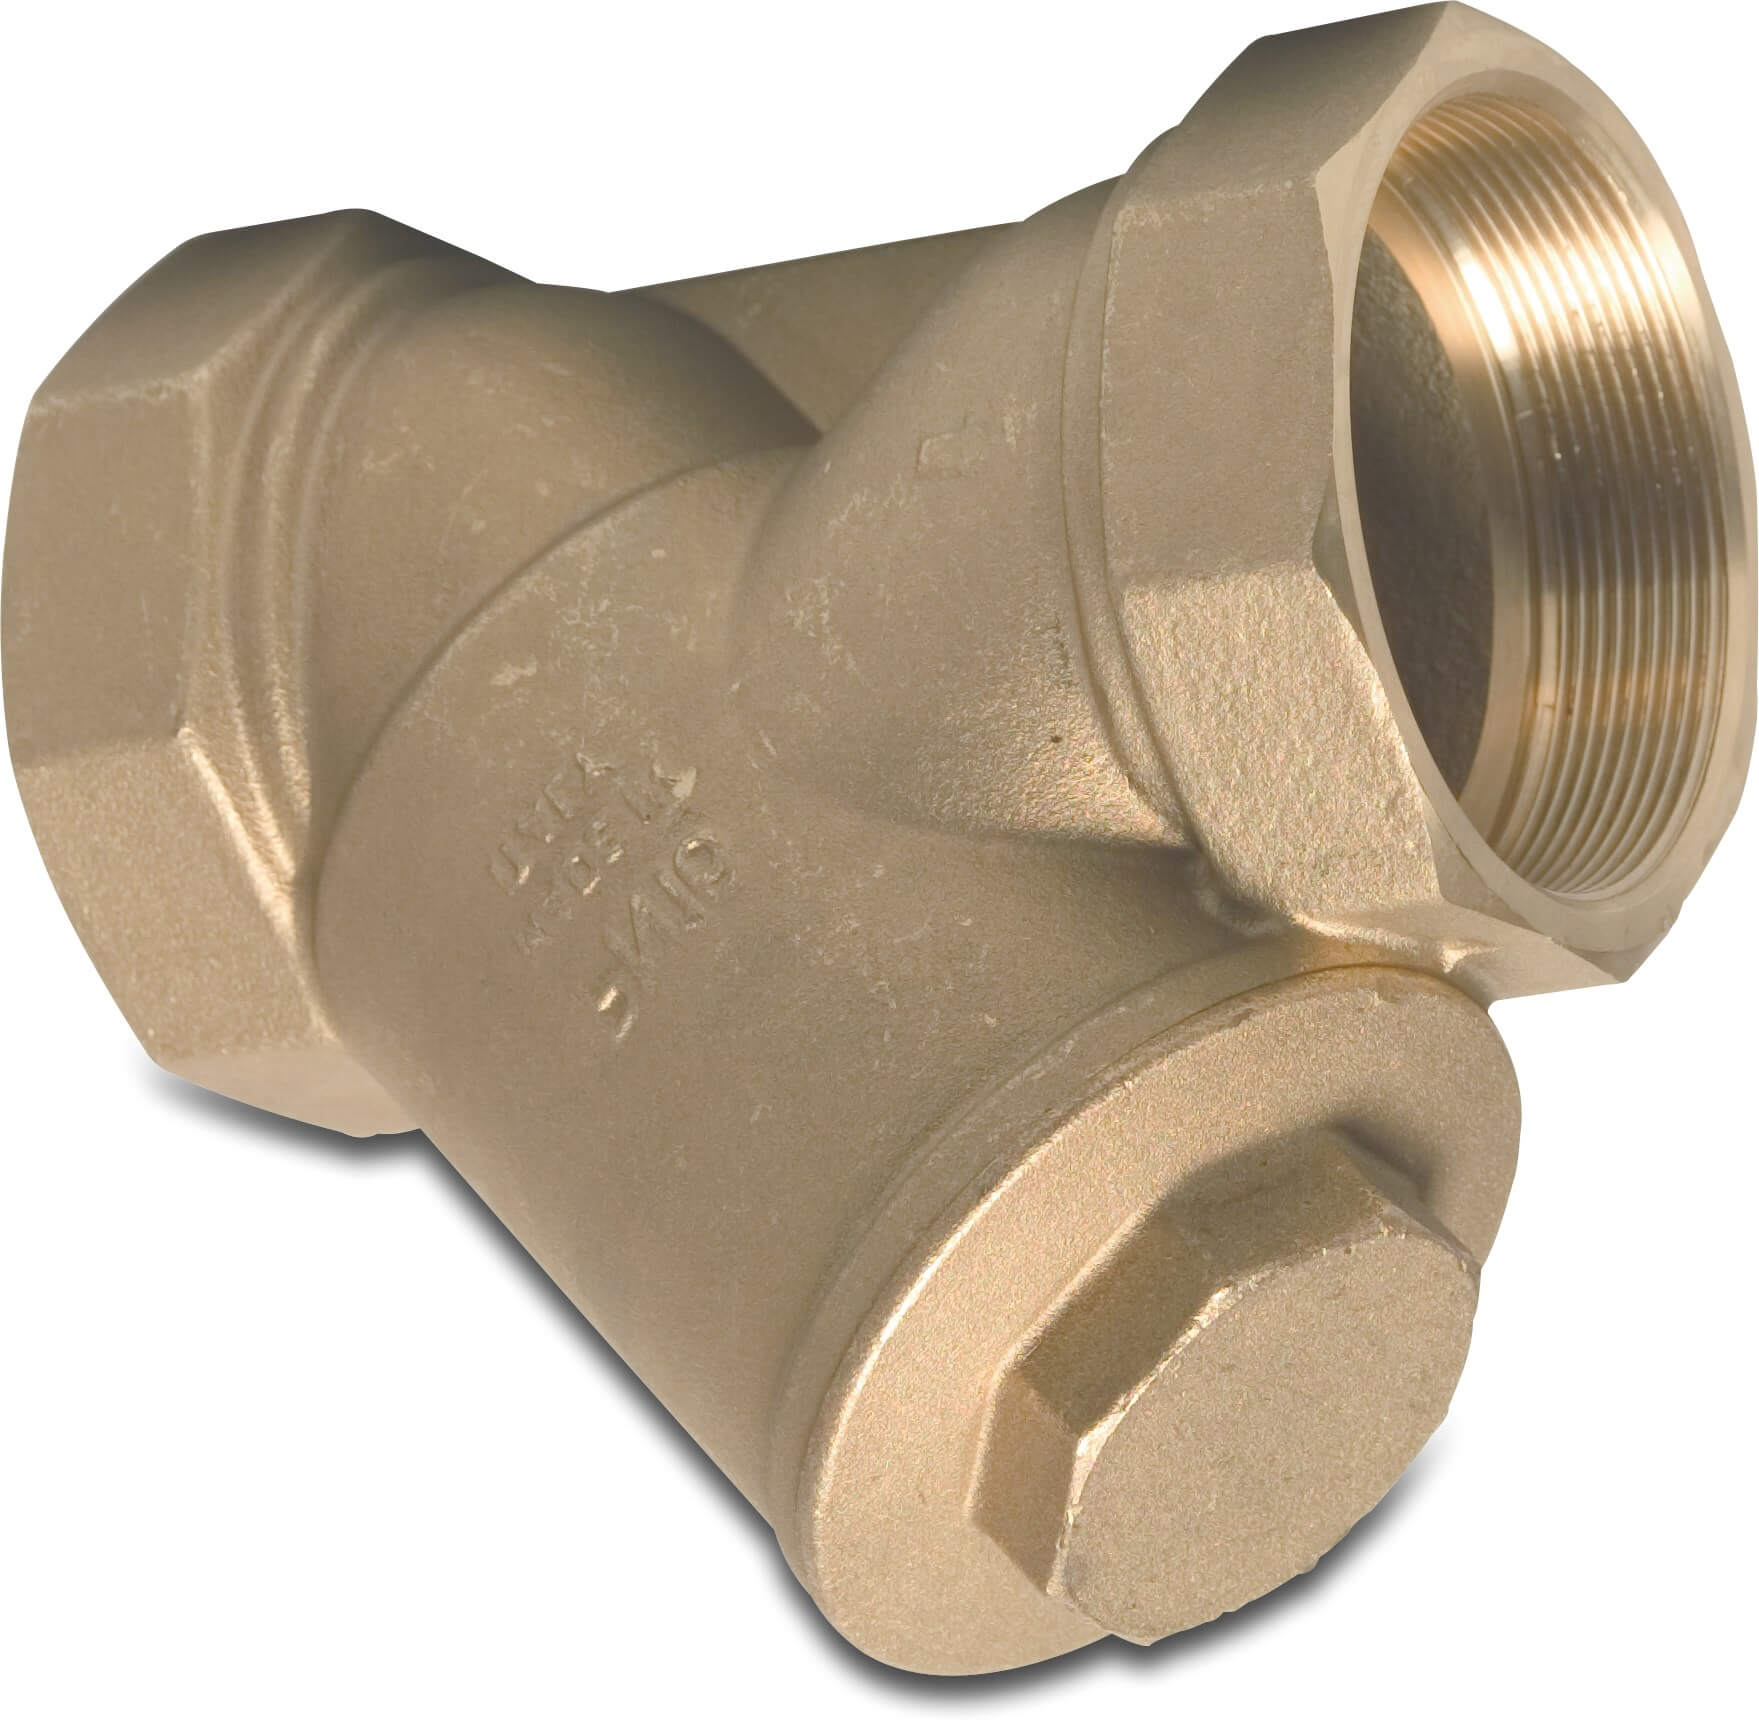 In-line Filter brass 3/8" female thread 16bar 700micron stainless steel type 192